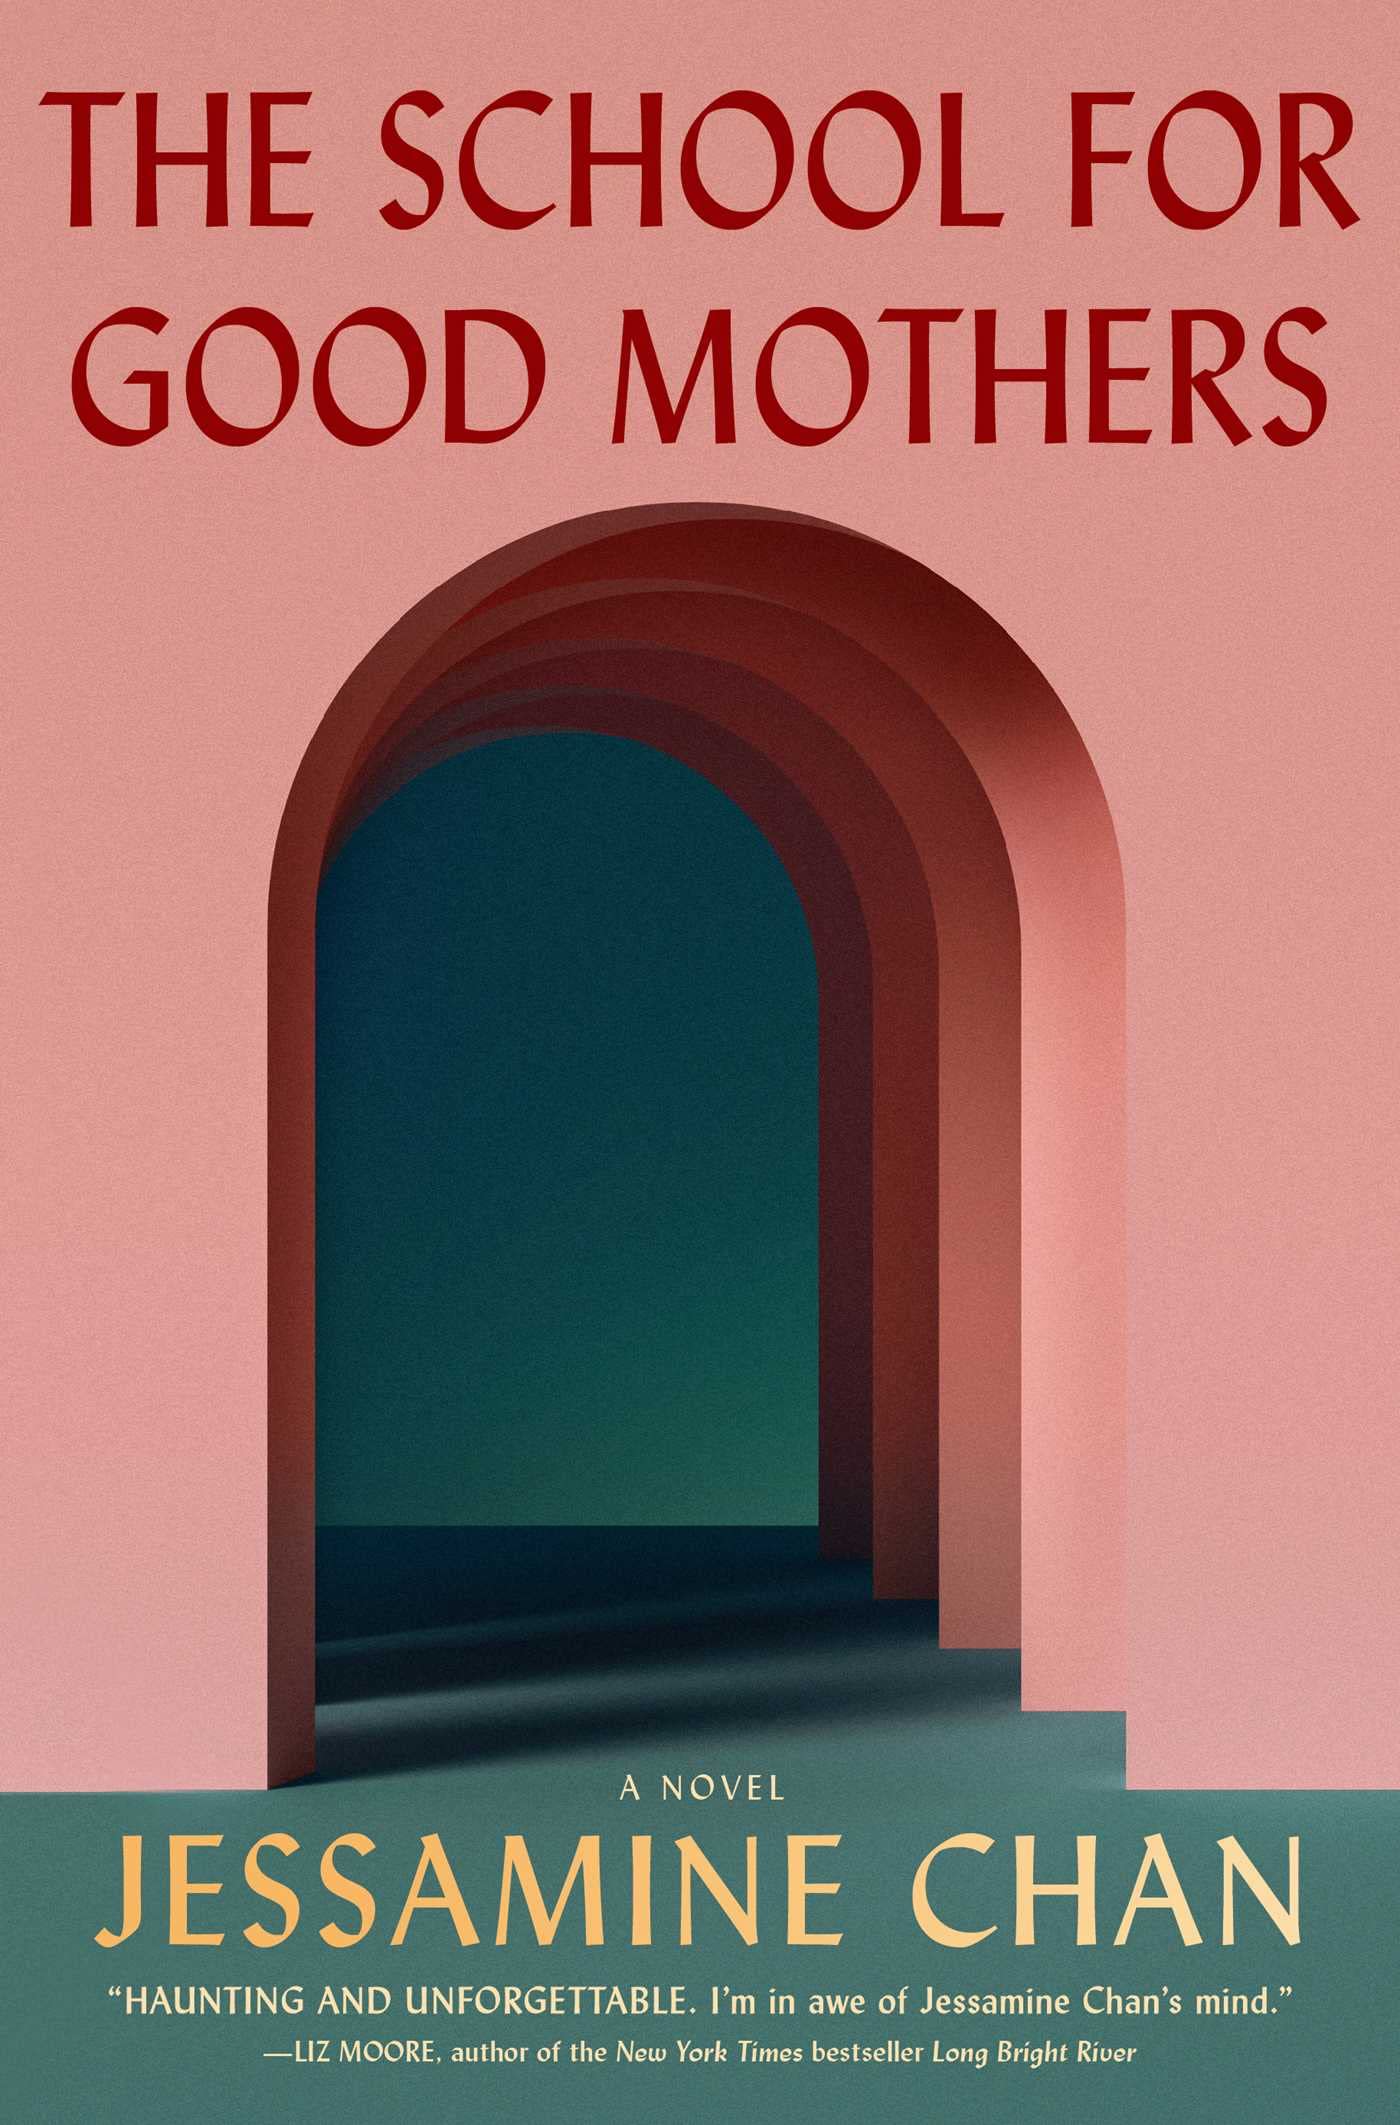 Image for "The School for Good Mothers"